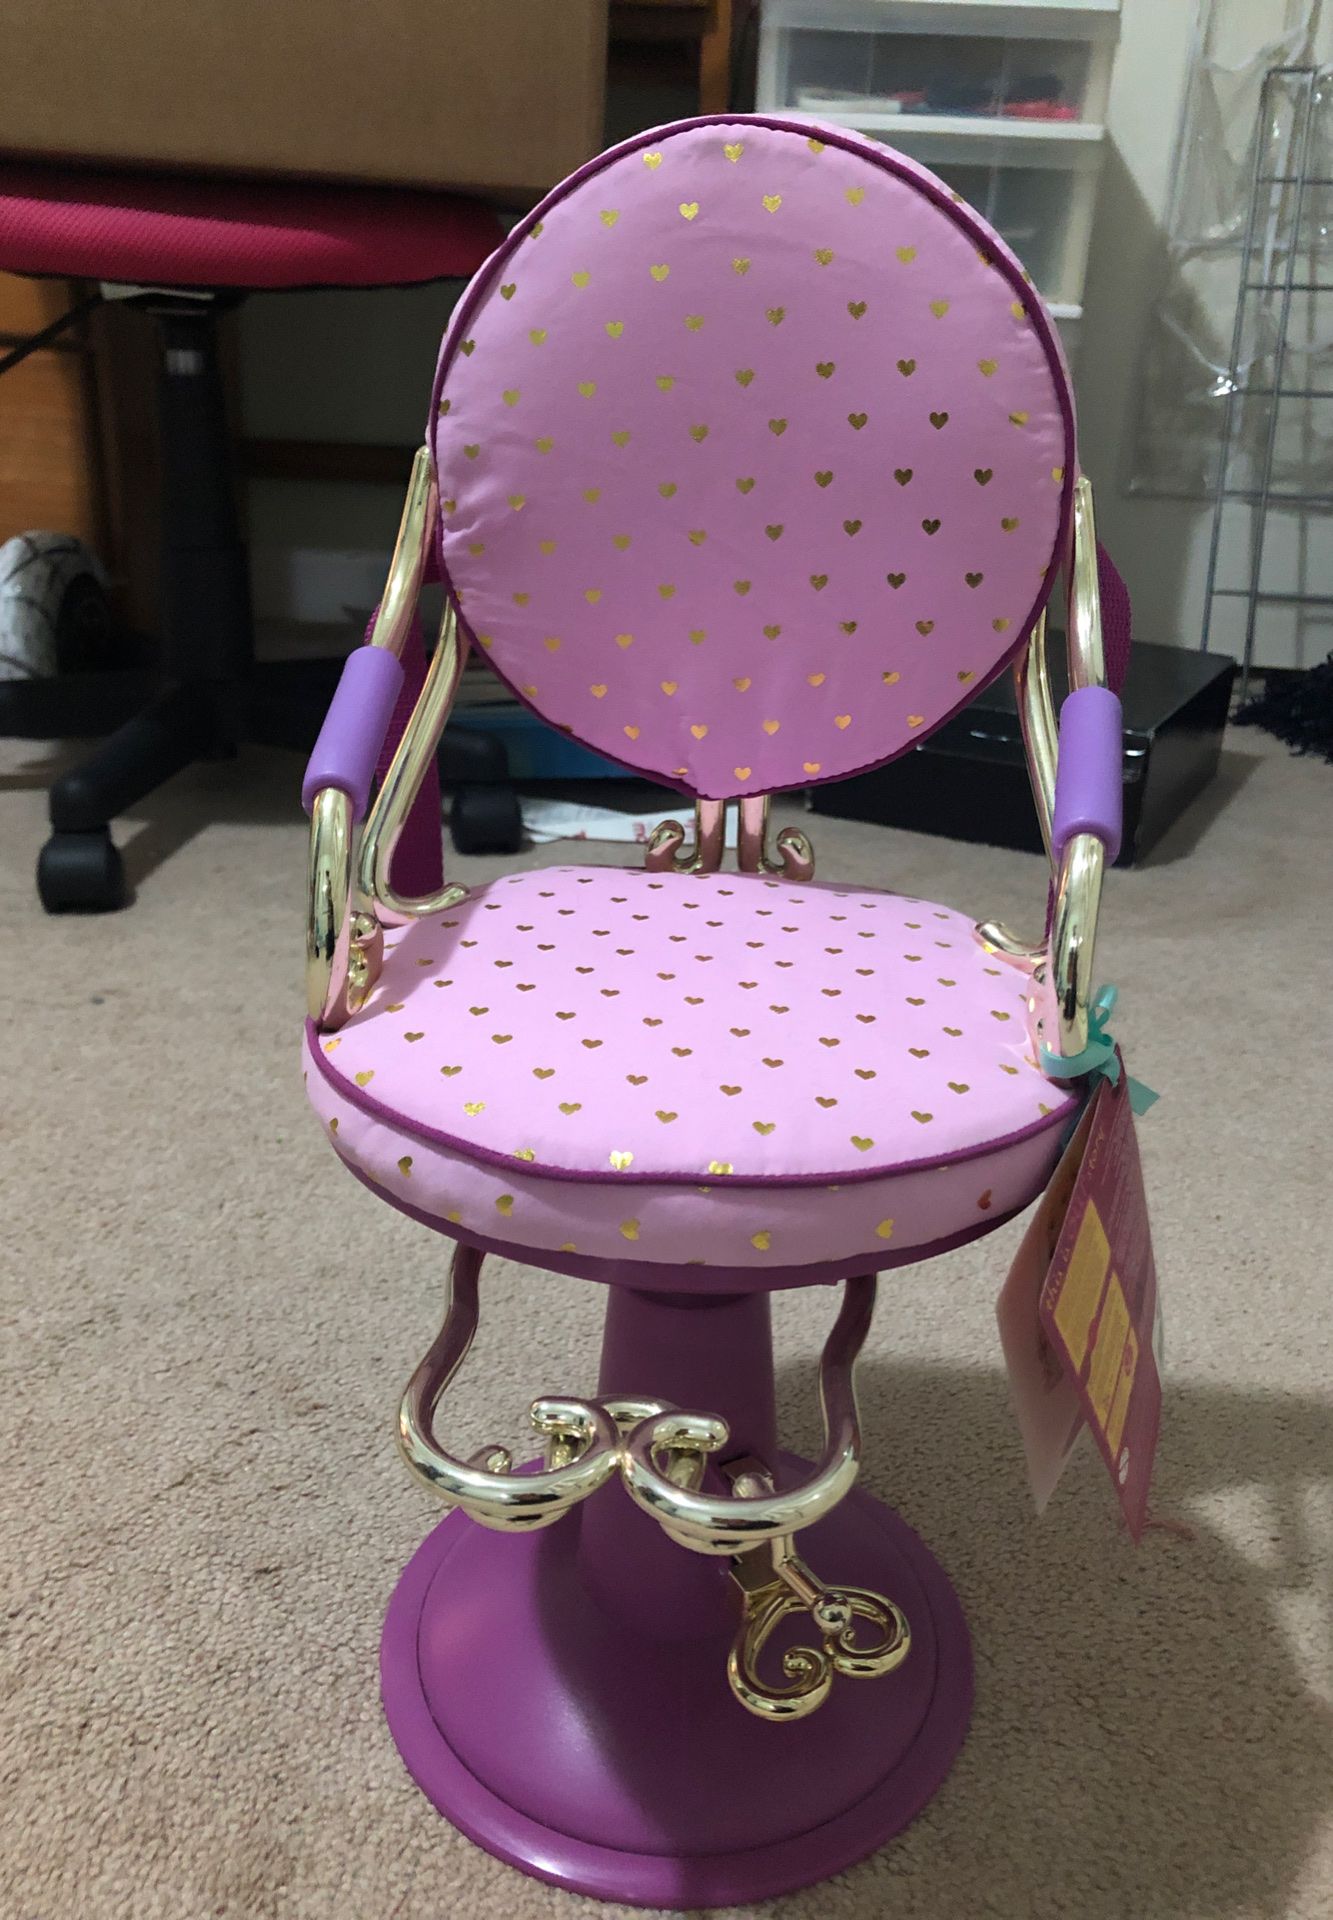 Our Generation Salon Chair (American Girl style)